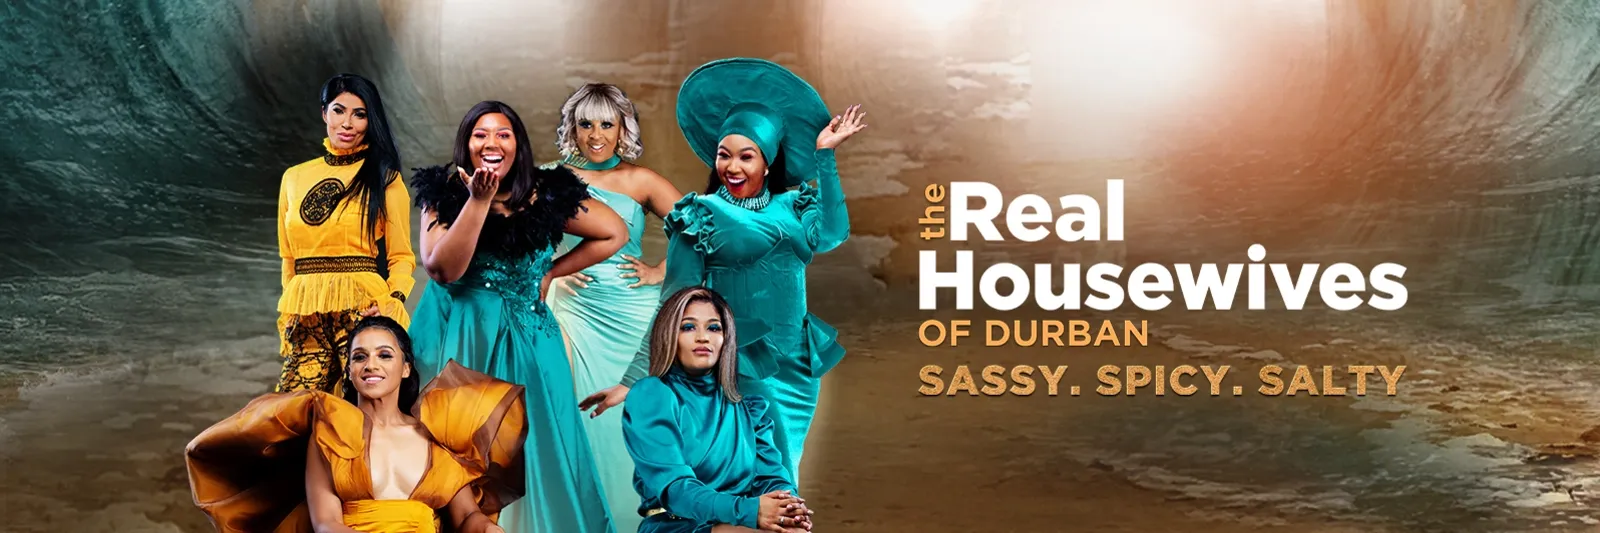 The Real Housewives Of Durban S04 (Episode 10 - 12 Added) 25